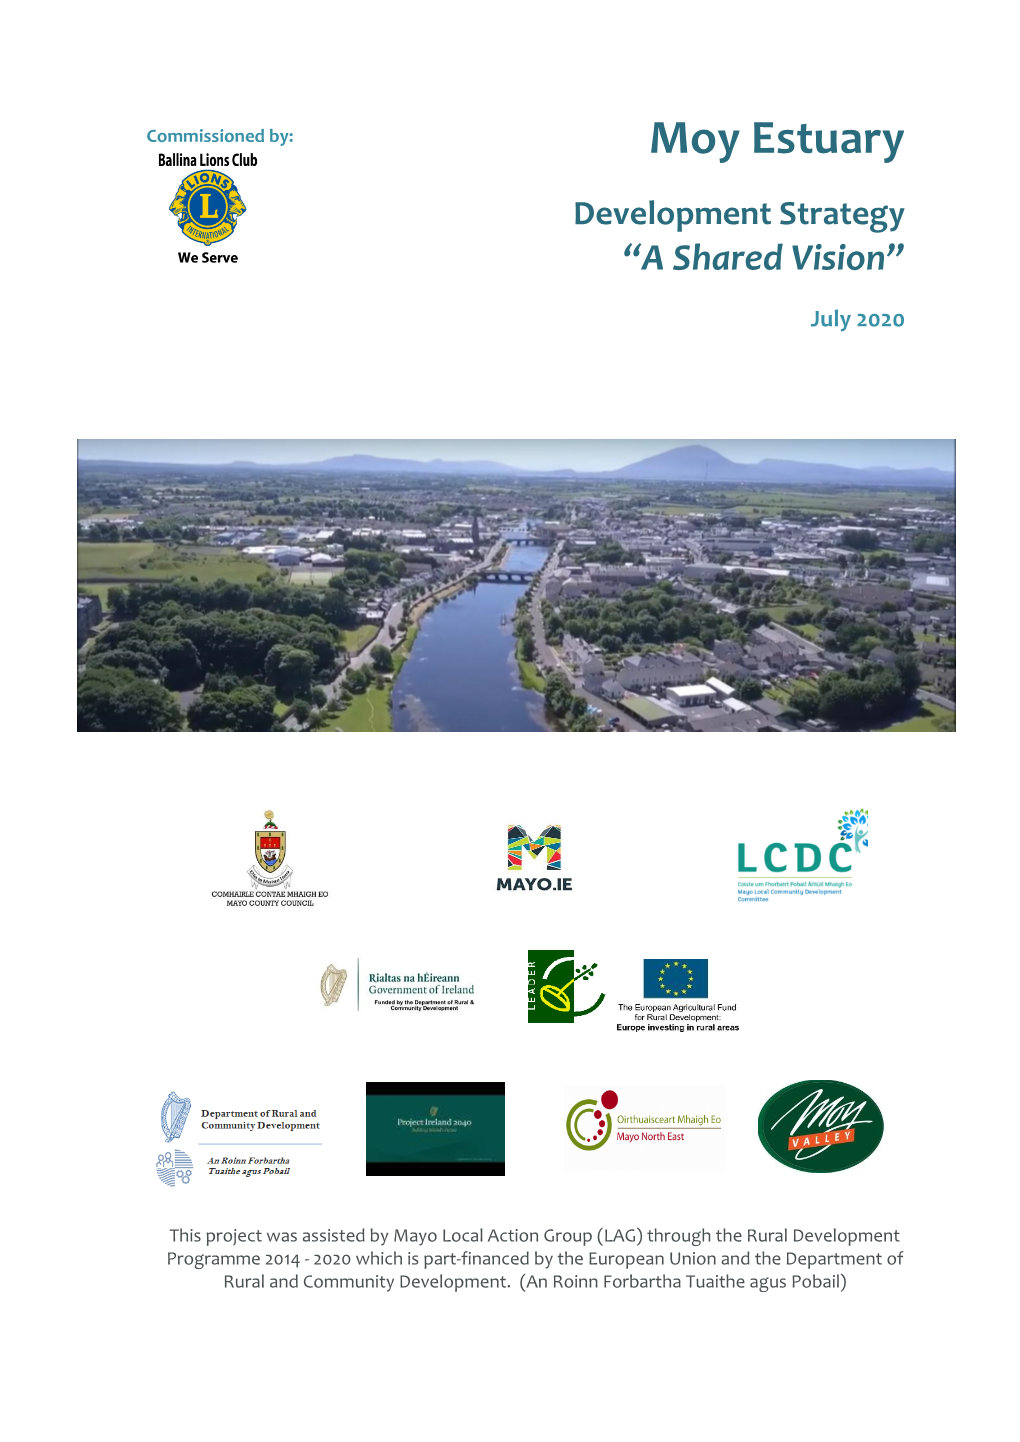 Moy Estuary Development Strategy “A Shared Vision”